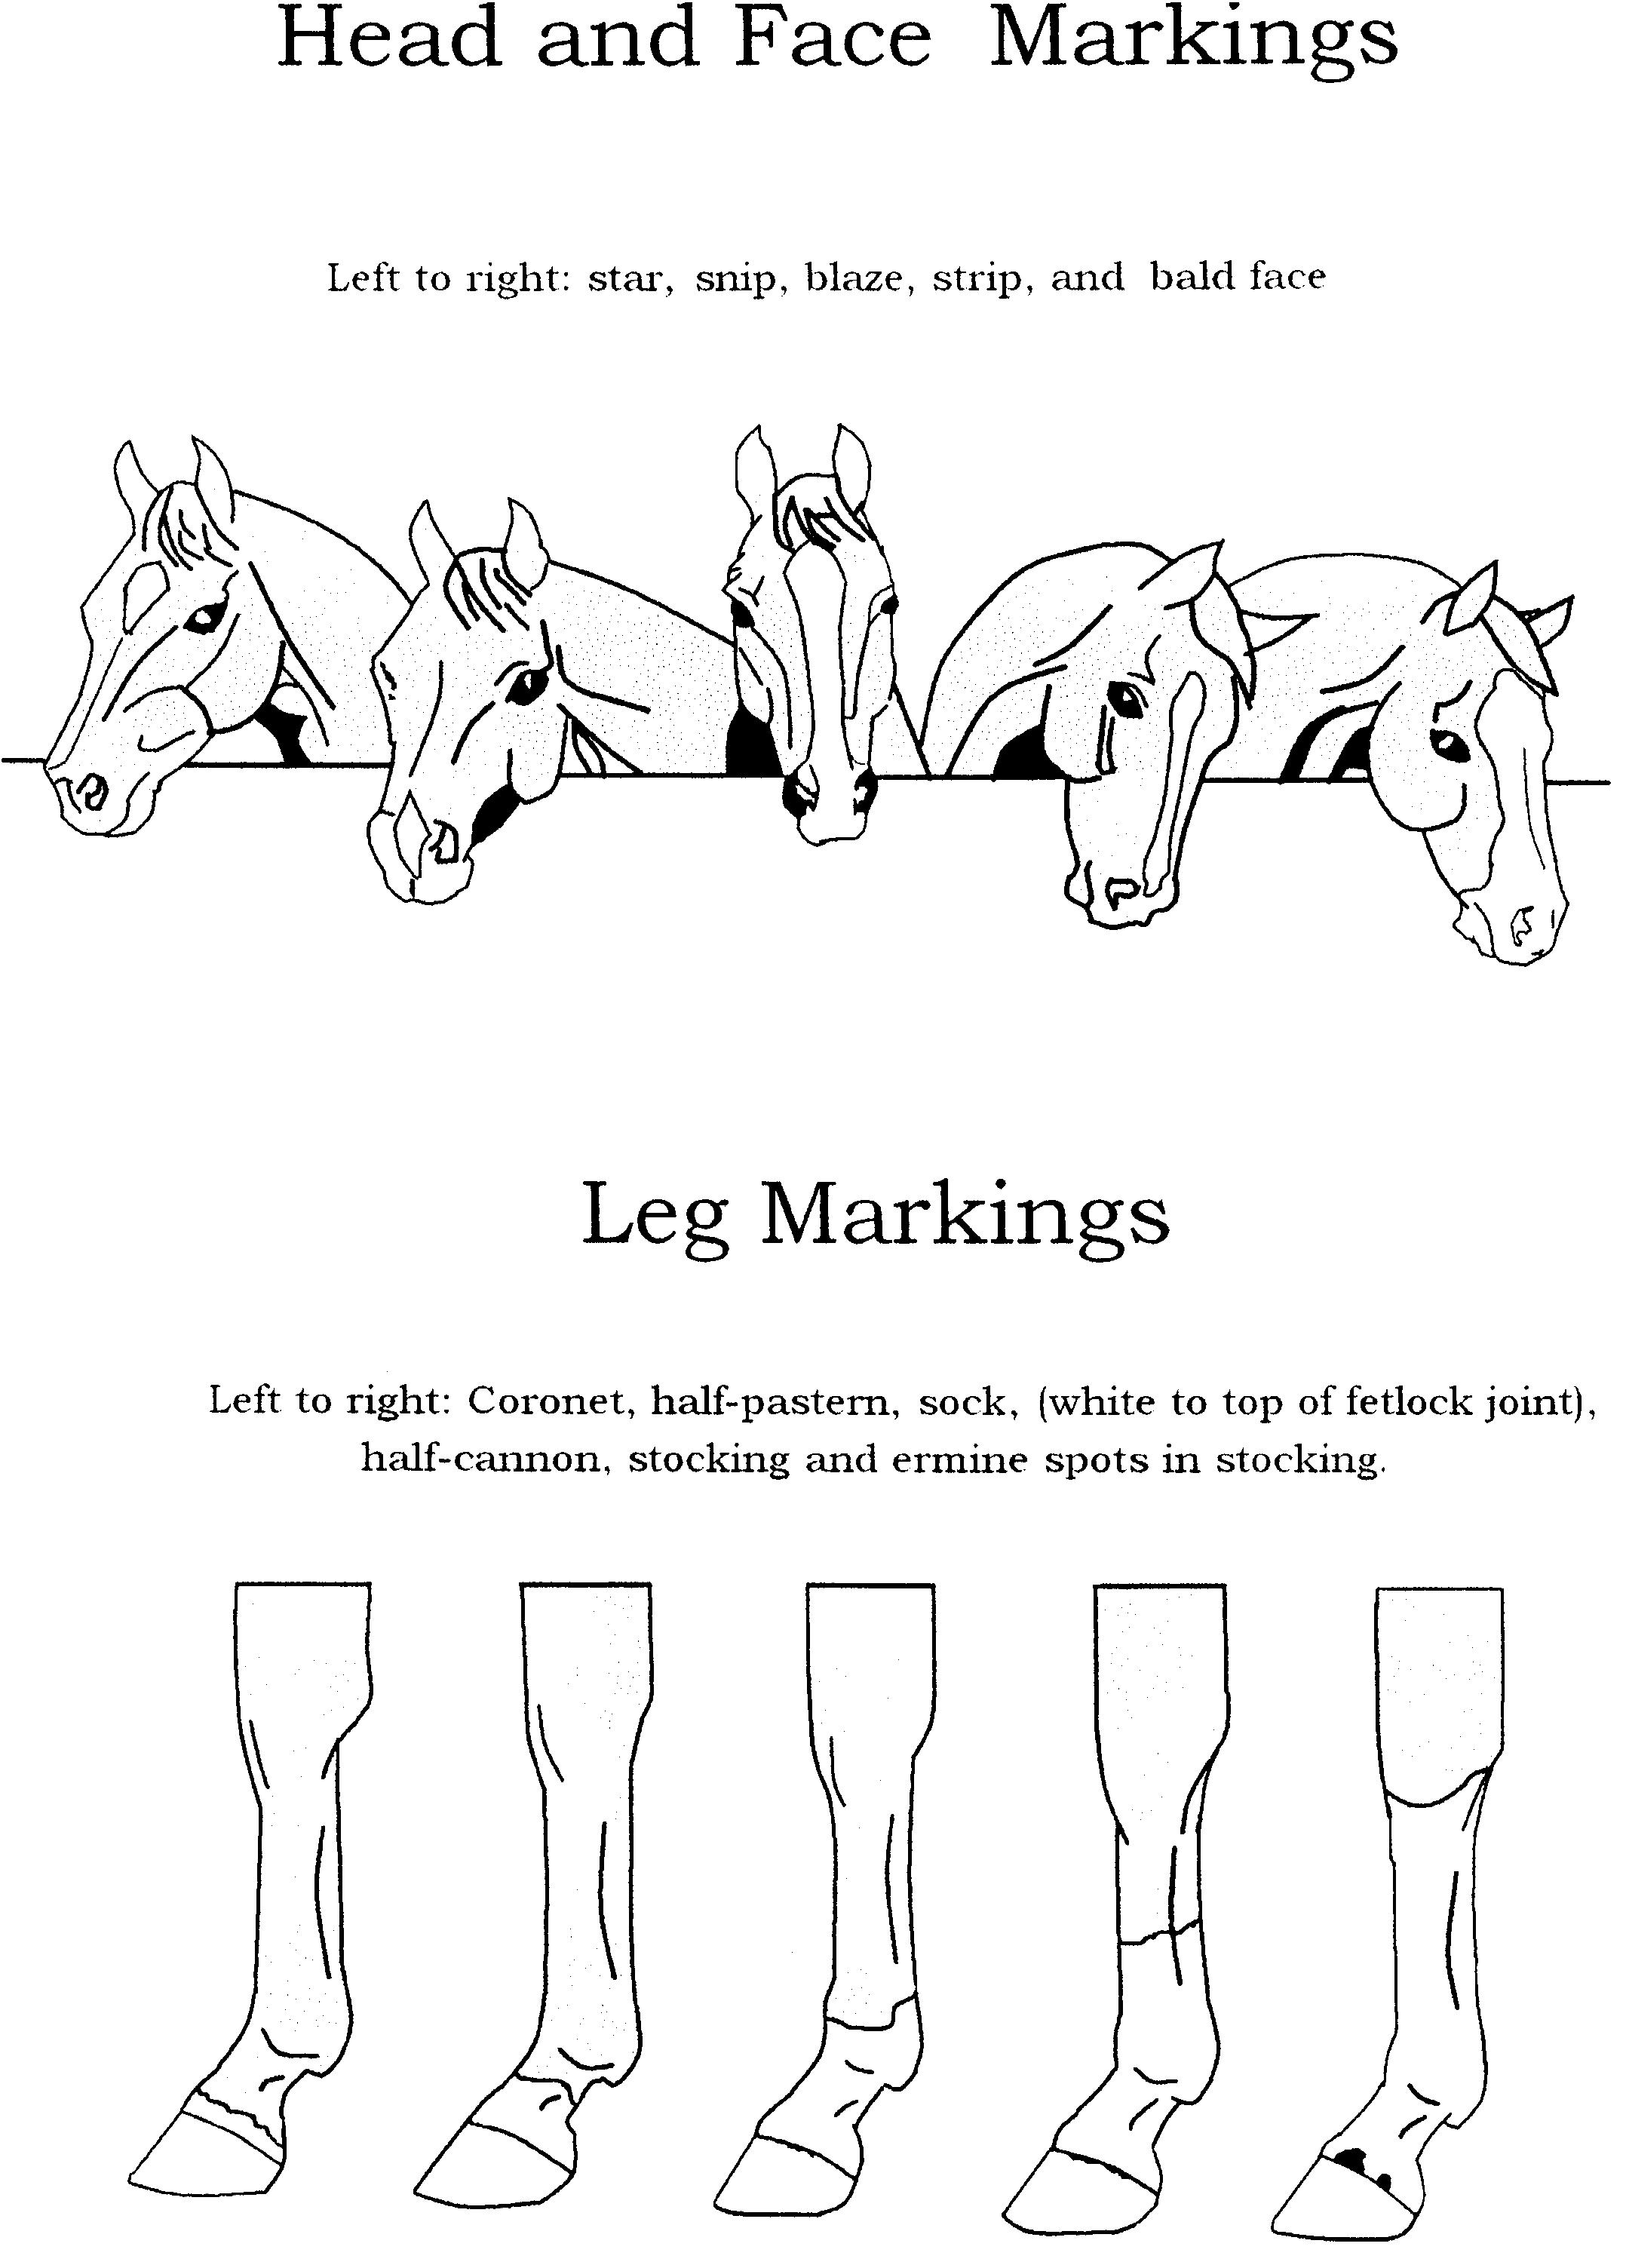 13-best-images-of-horse-safety-worksheets-printable-horse-leg-marking-find-the-problems-horse